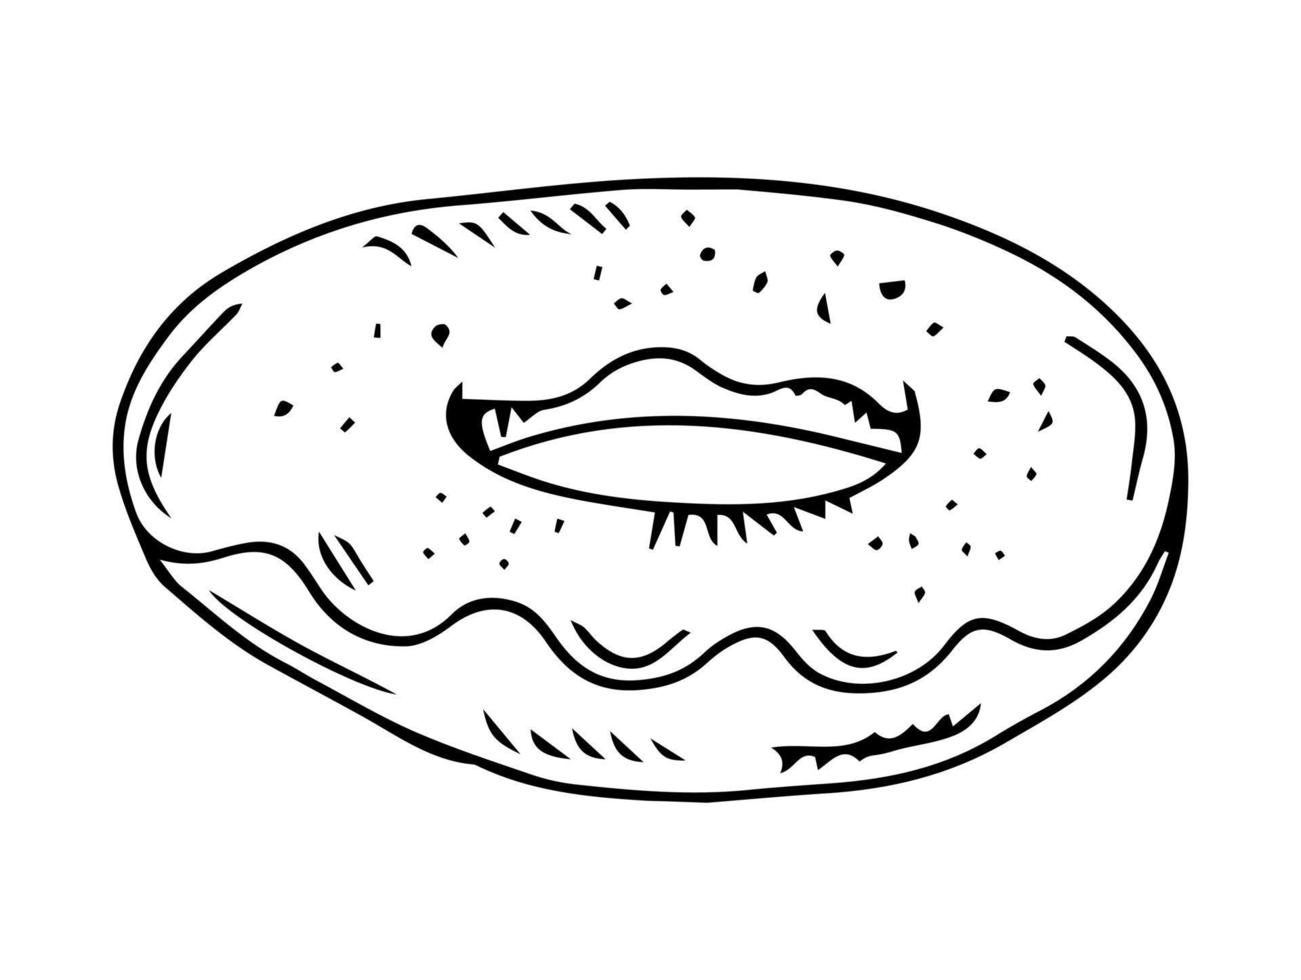 Donut hand drawing doodle style sketch isolated on white background. Vector stock illustration.